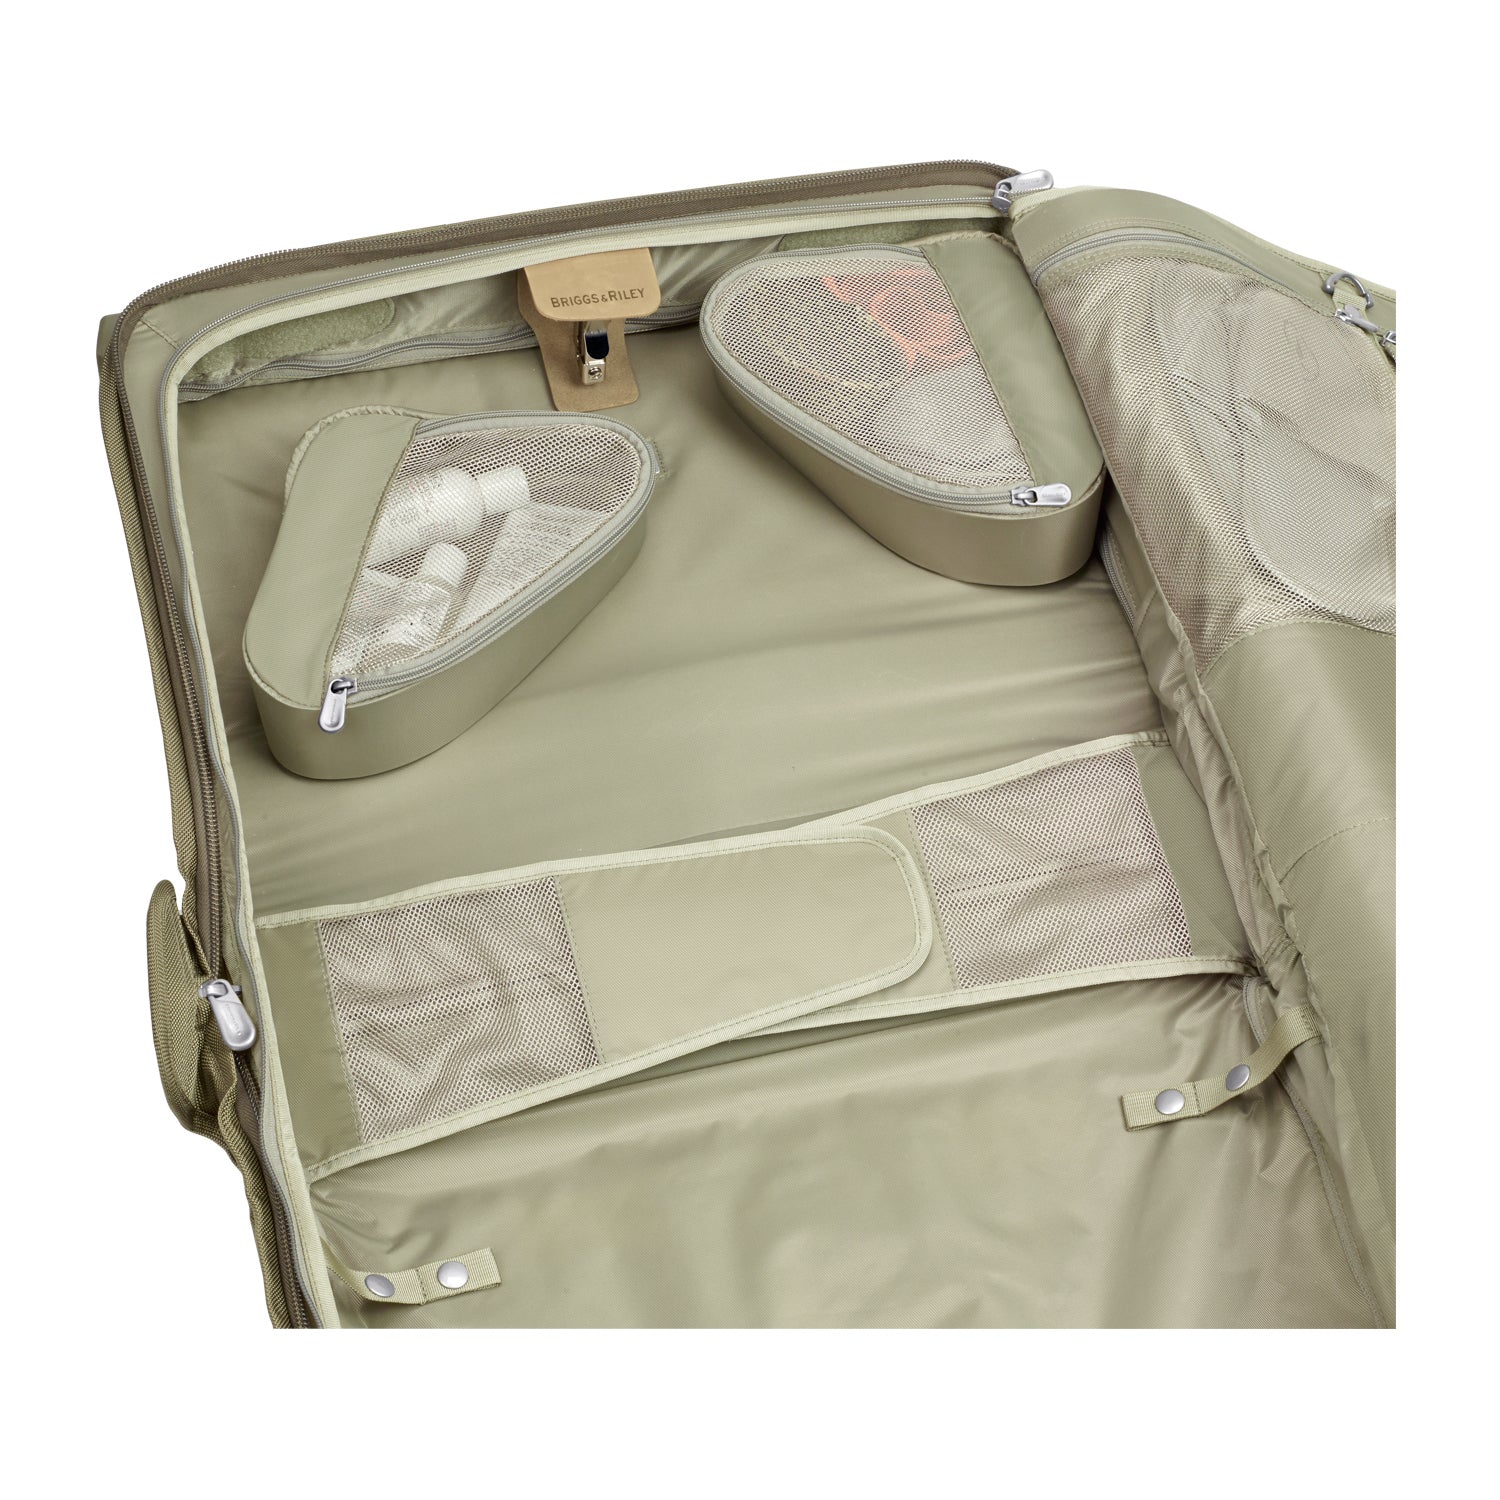 Baseline Carry-On Wheeled Garment Bag | Briggs and Riley